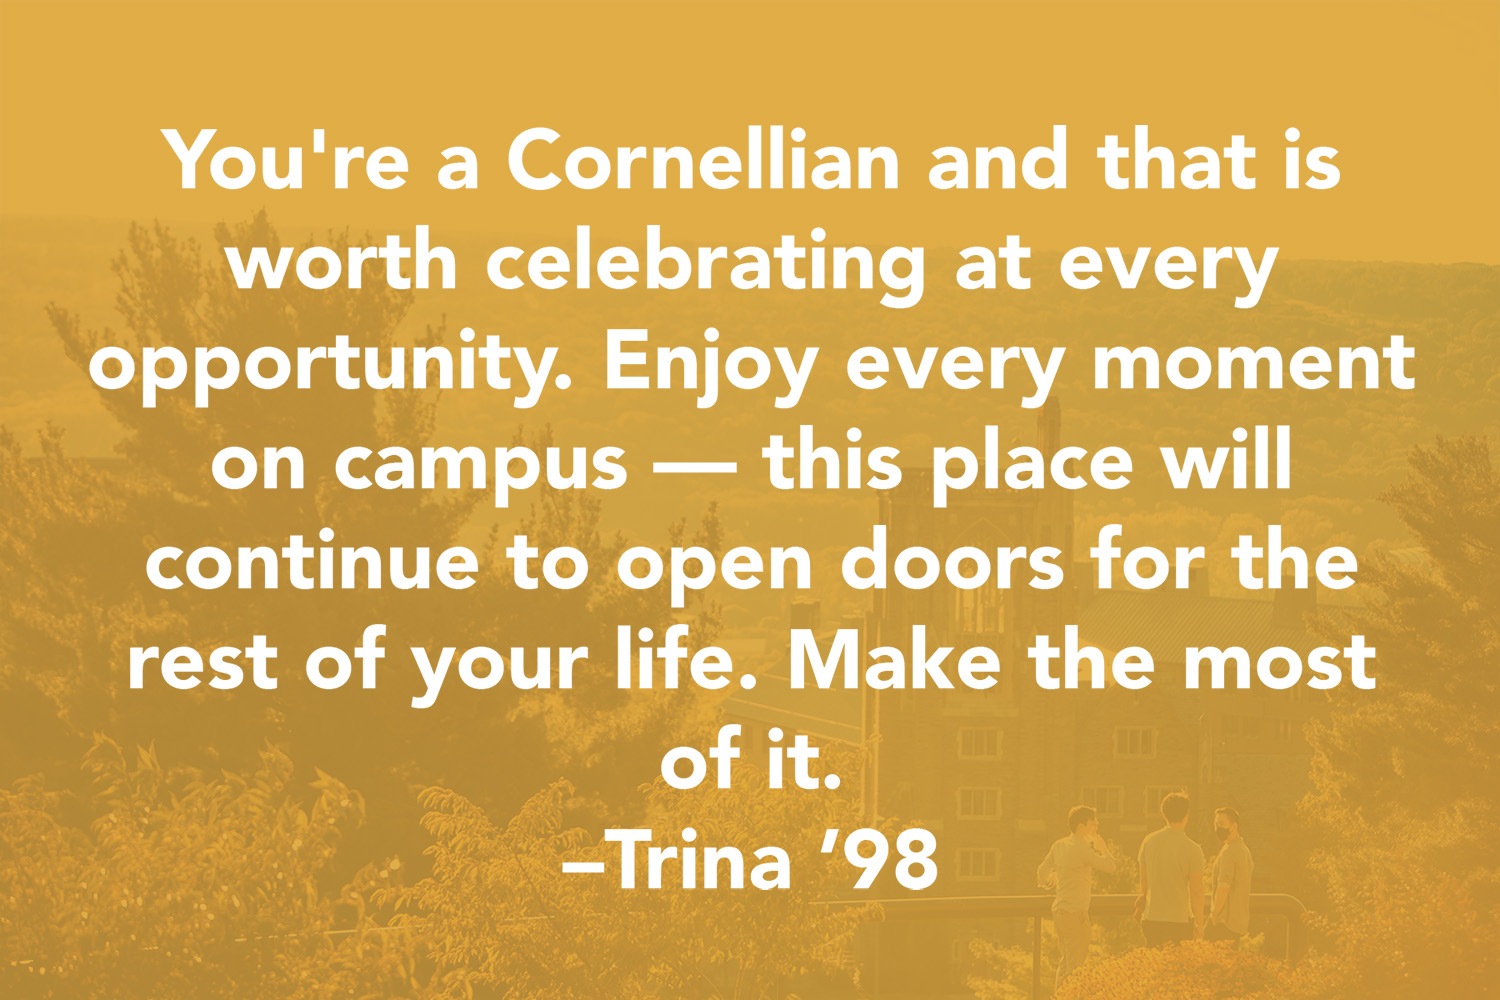 Quote: You're a Cornellian and that is worth celebrating at every opportunity. Enjoy every moment on campus - this place will continue to open doors for the ret of your life. Make the most of it. -Trina '98